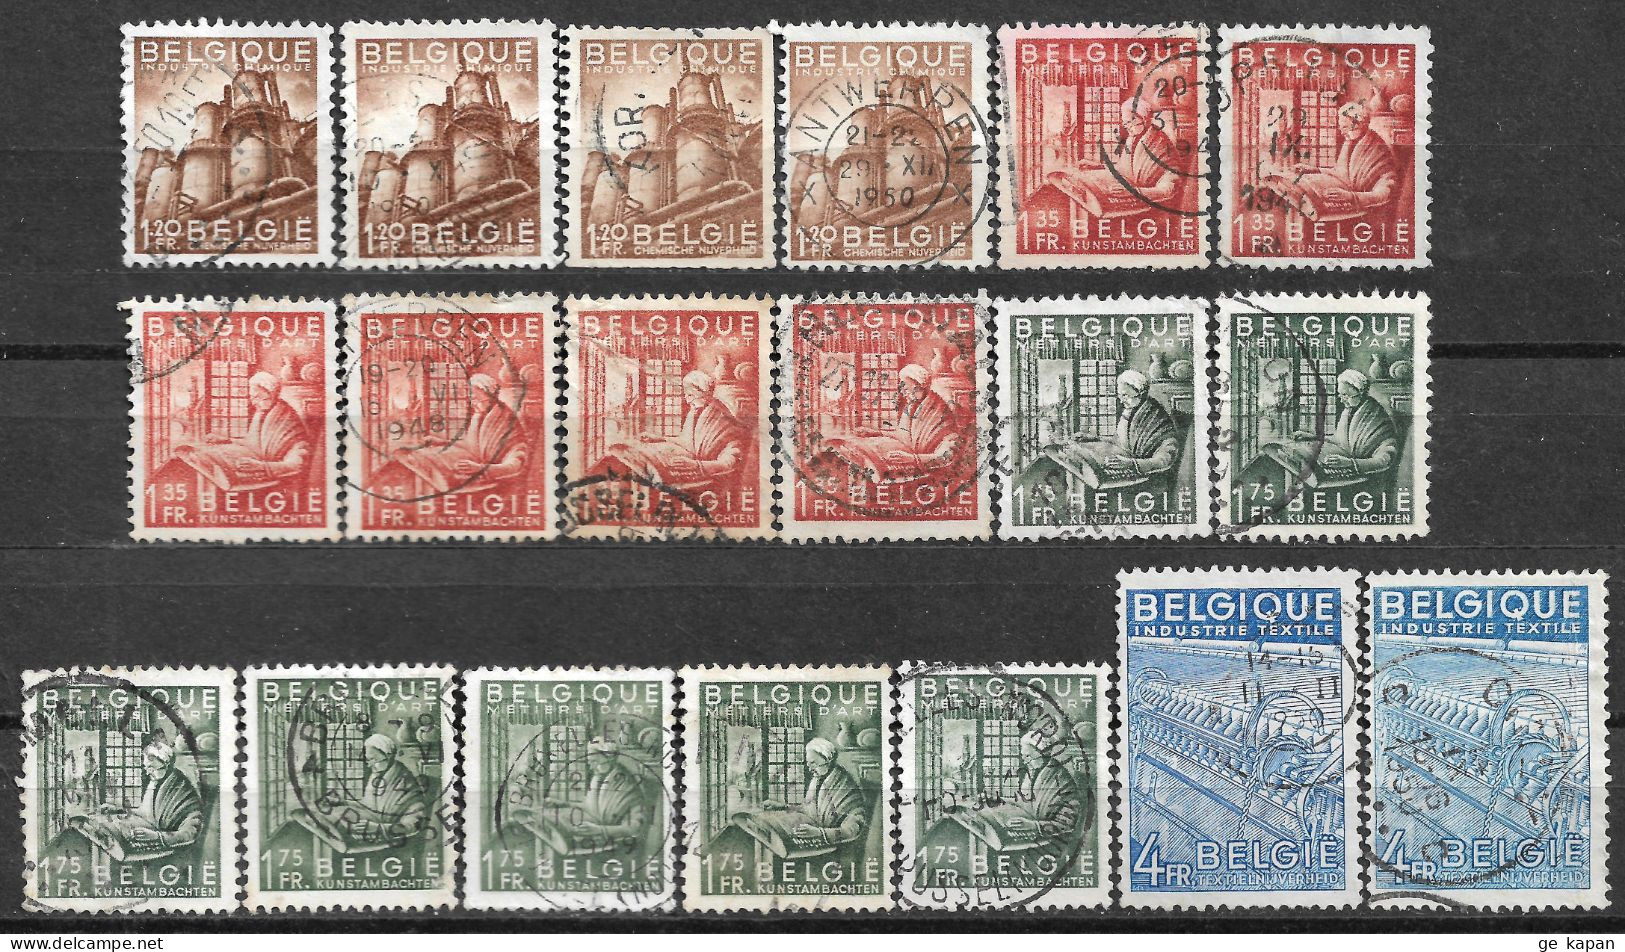 1948 BELGIUM Set Of 19 USED STAMPS (Michel # 805,806,808,813) - 1948 Exportation